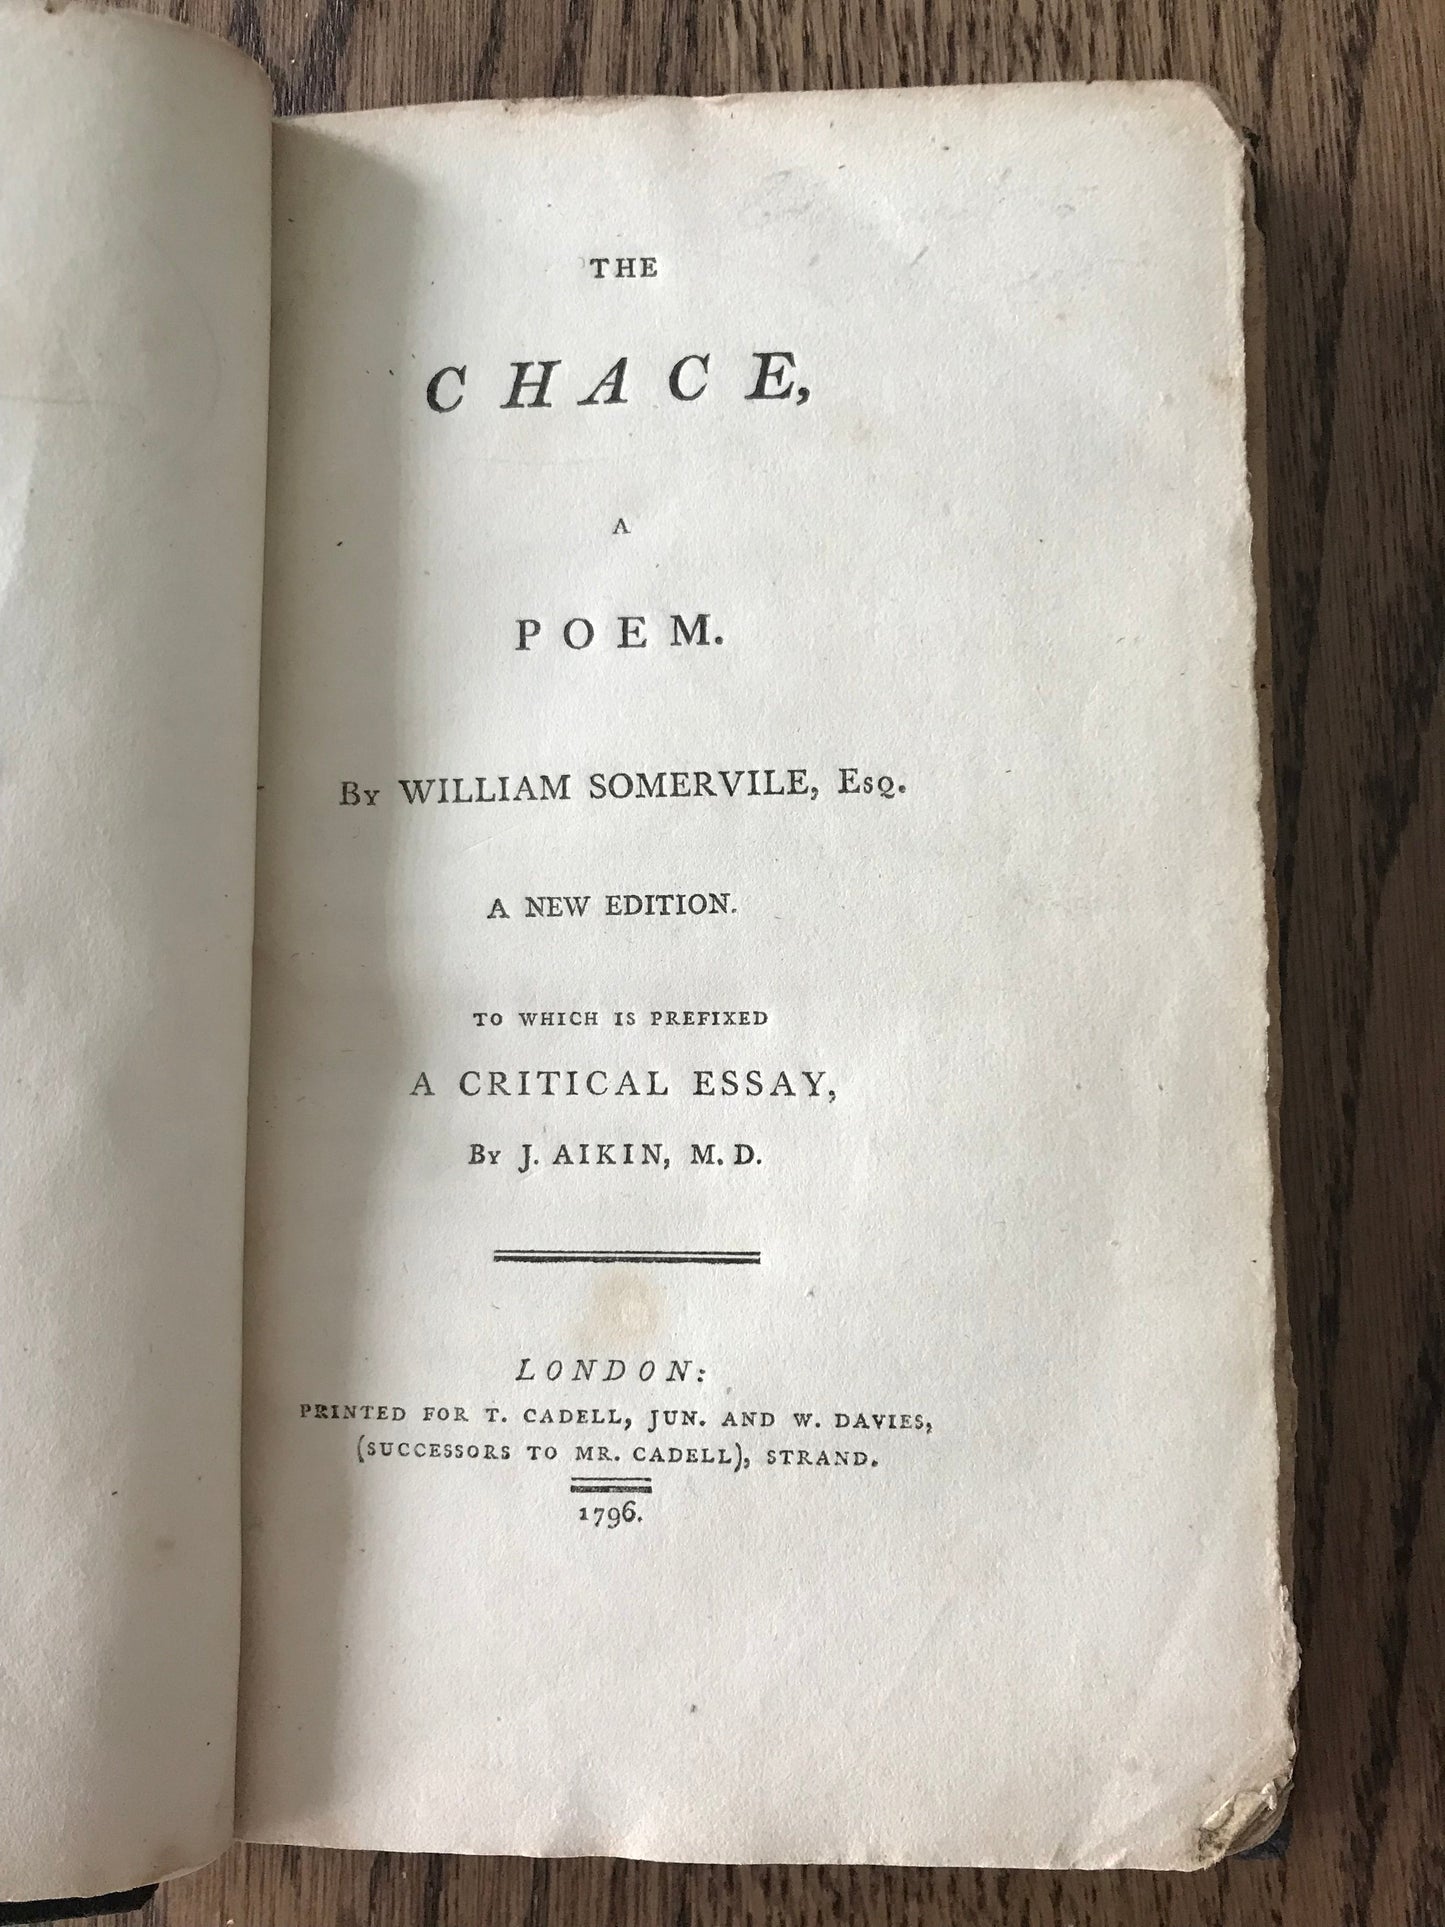 THE CHACE - A POEM BY WILLIAM SOMERVILE, ESQ., BooksCardsNBikes